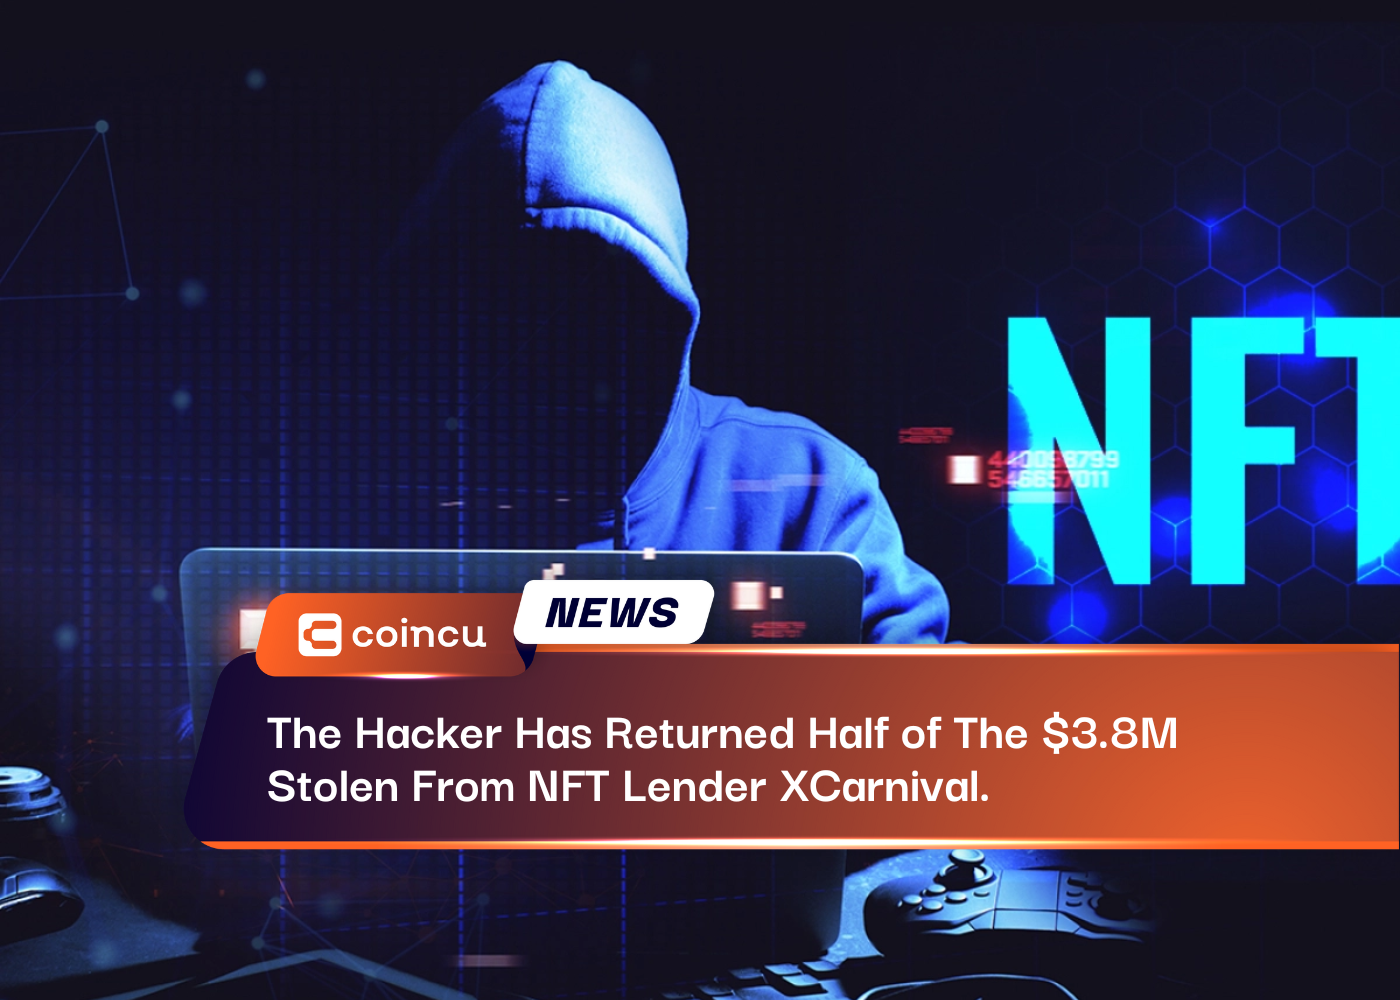 The Hacker Has Returned Half of The $3.8M Stolen From NFT Lender XCarnival.